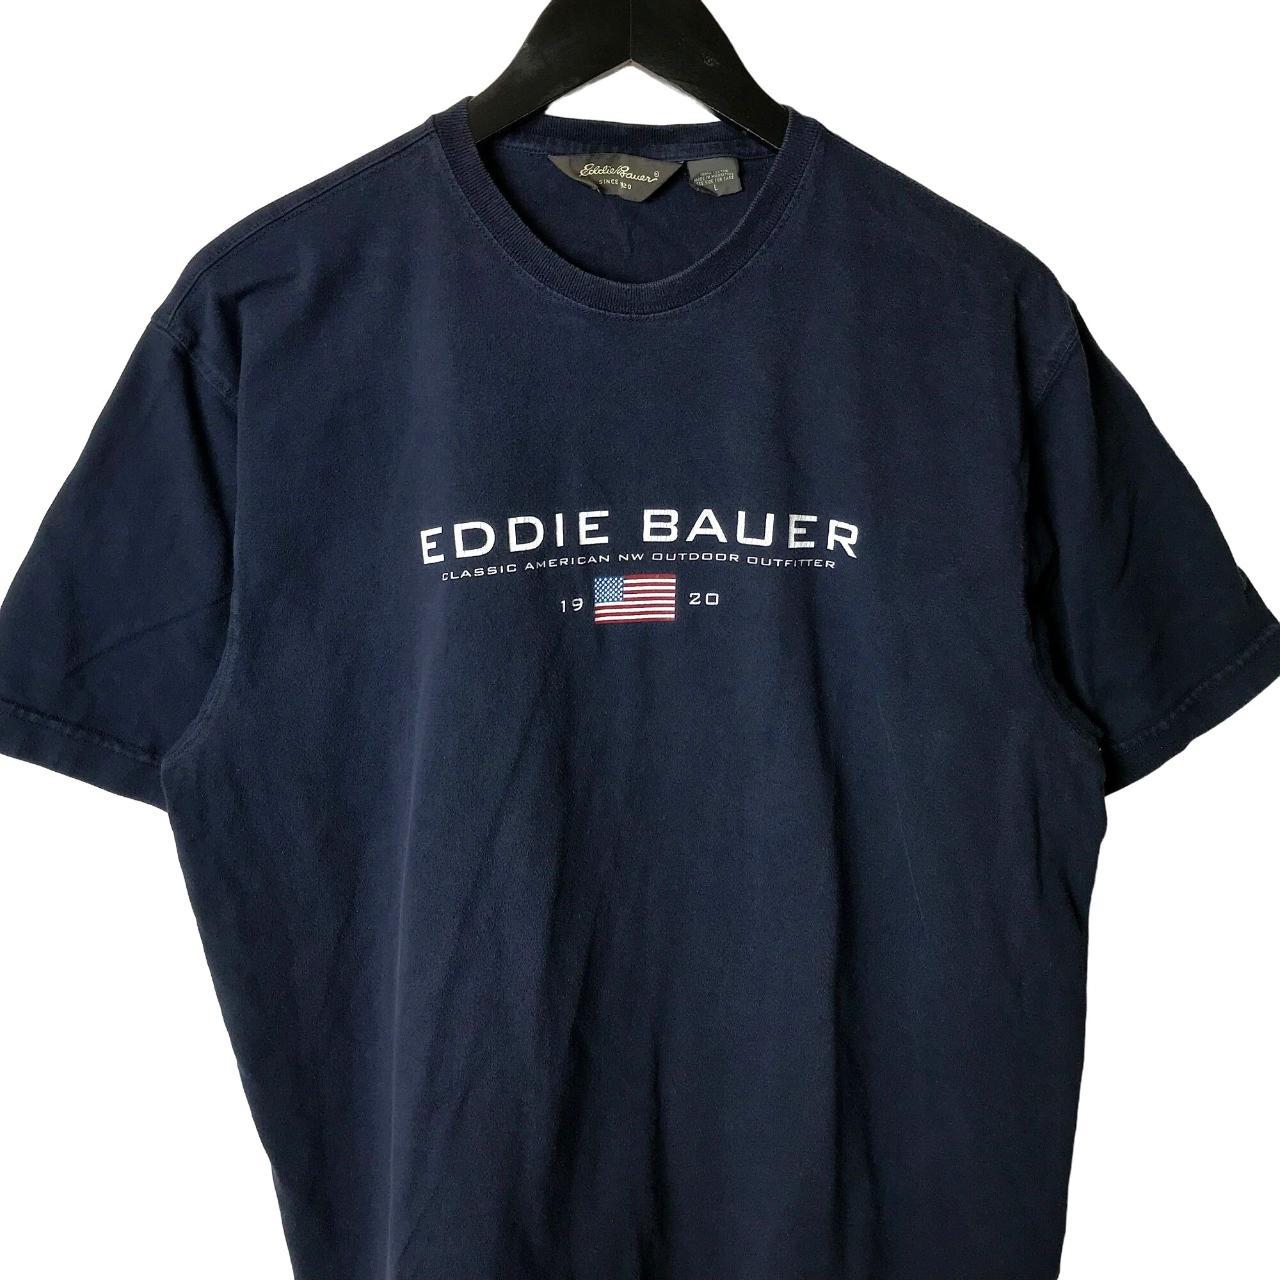 Eddie Bauer Shirt Men Small Adult Blue Basic Tee Active Outdoors